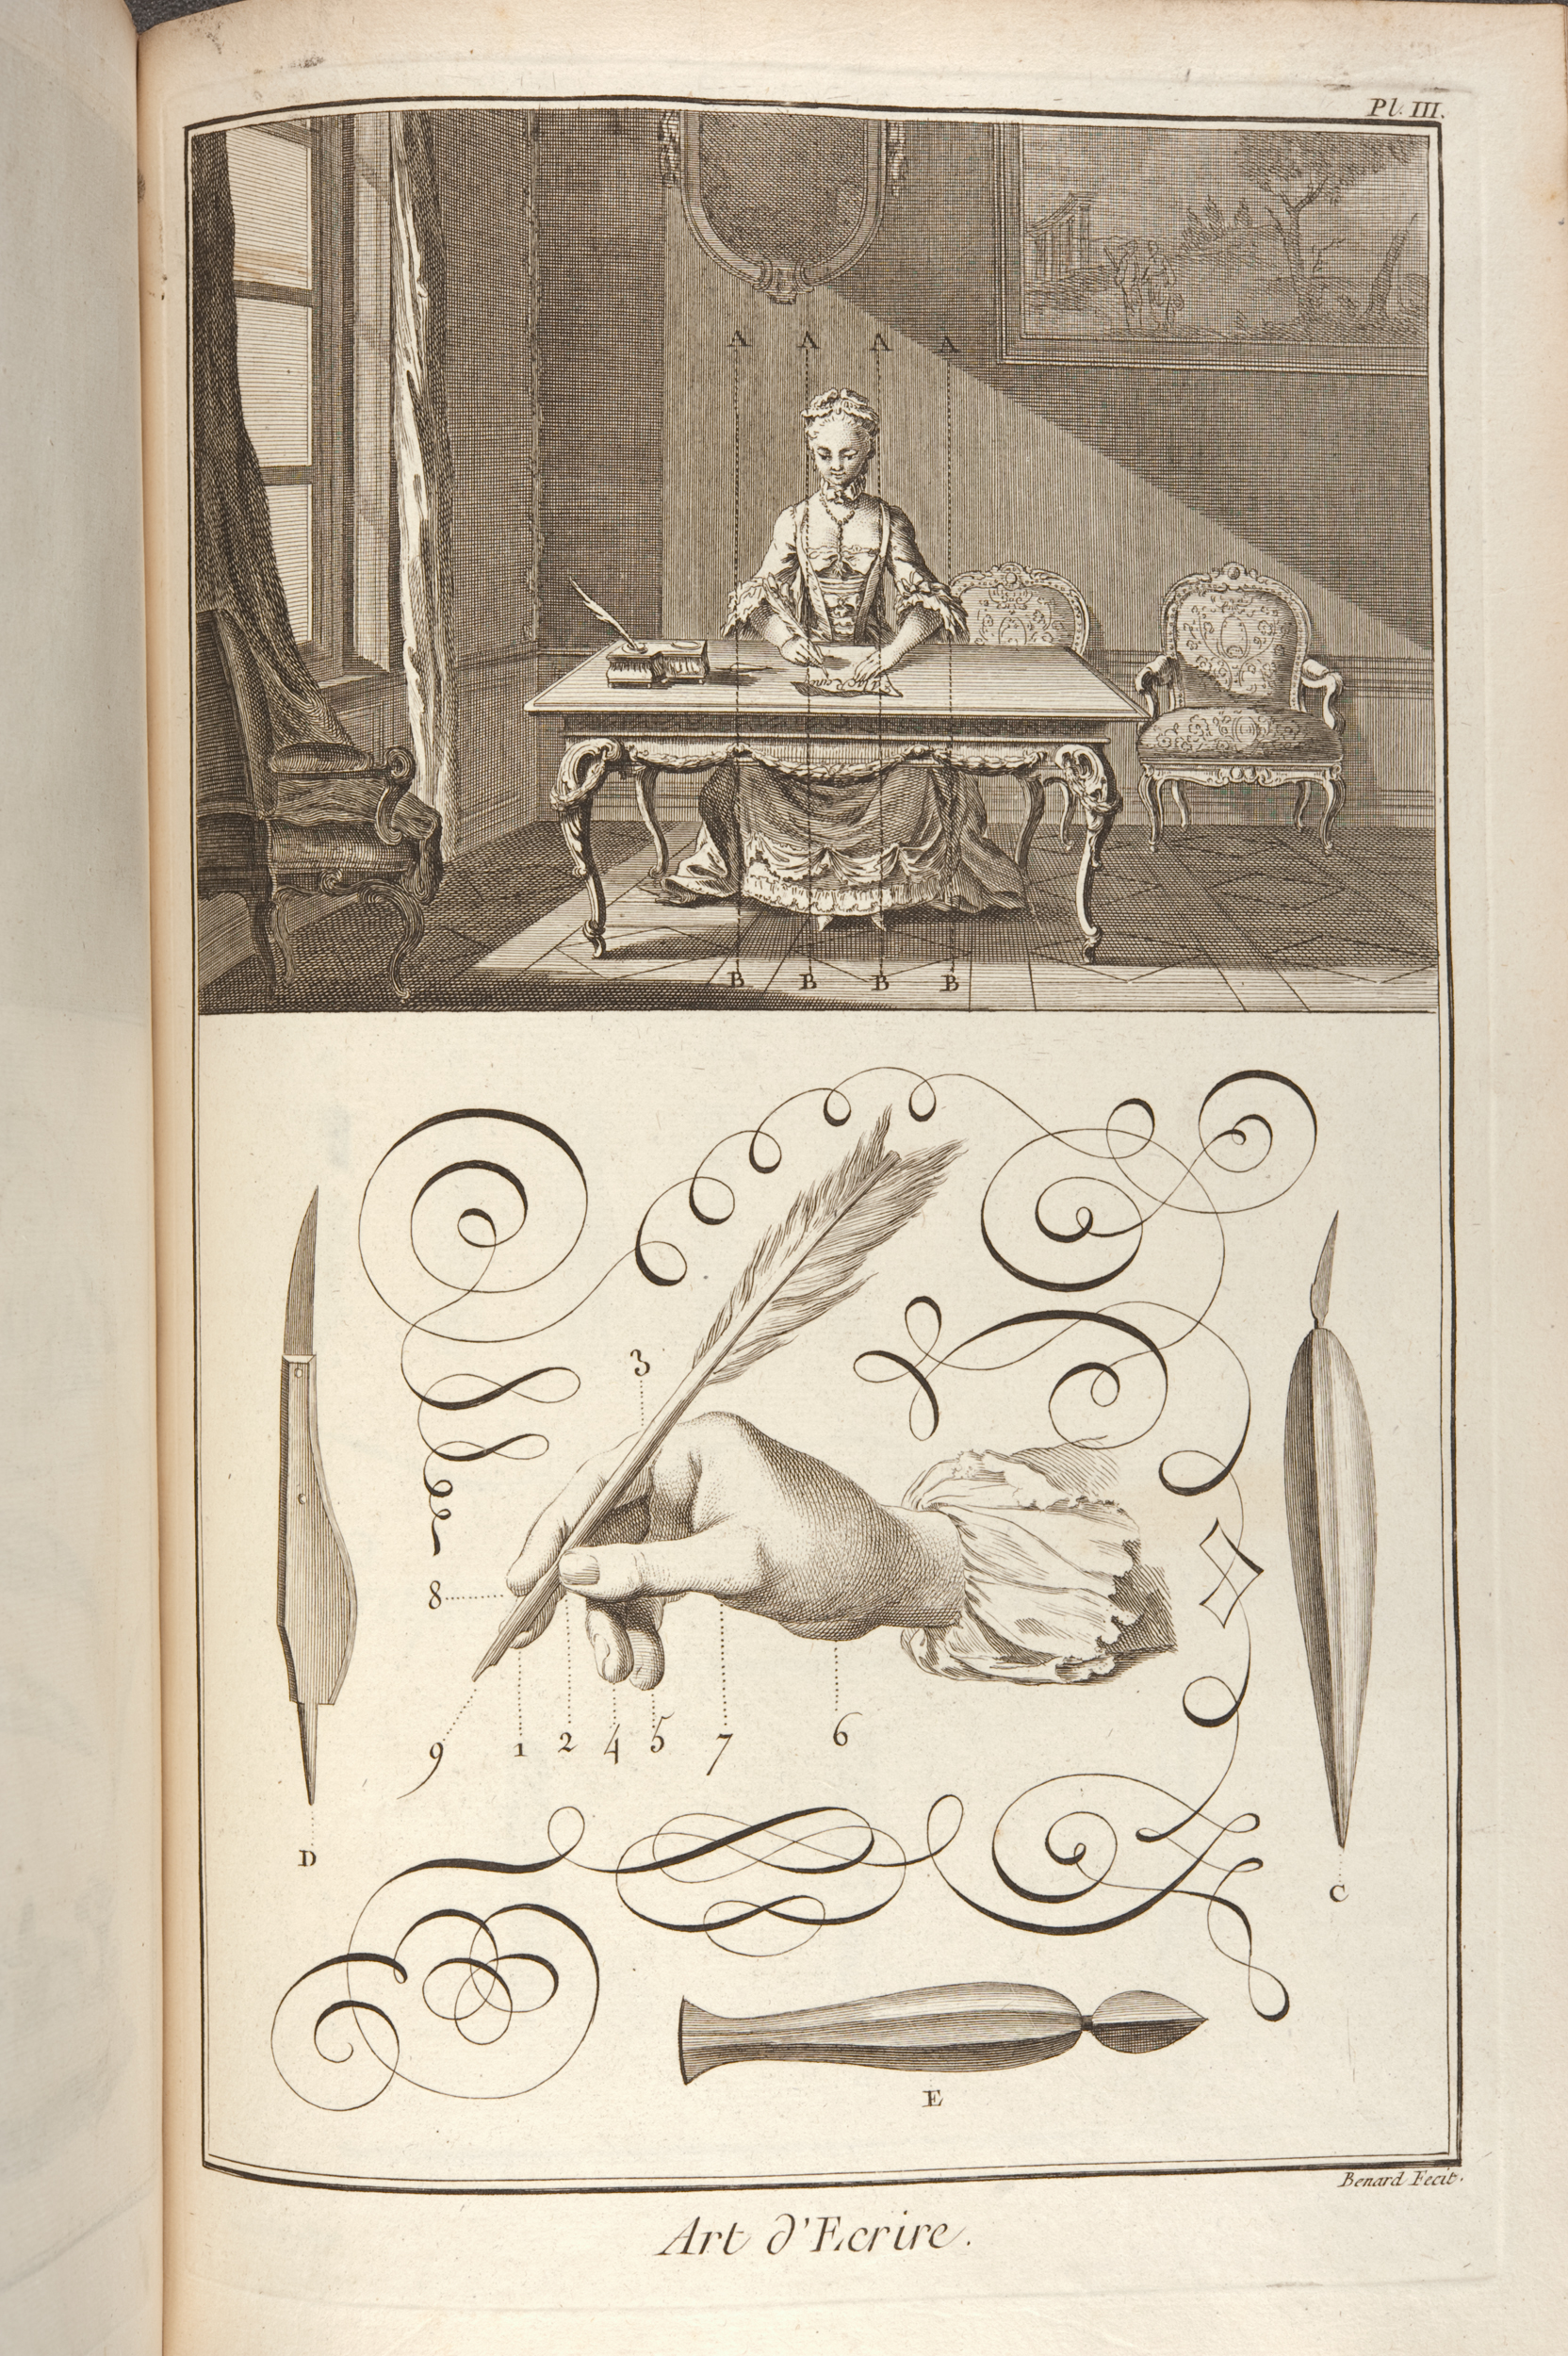 Plate depicting "Art d'Ecrire" (handwriting) from Diderot & d’Alembert’s Encyclopédie (St Andrews copy at =sf AE25.D5)